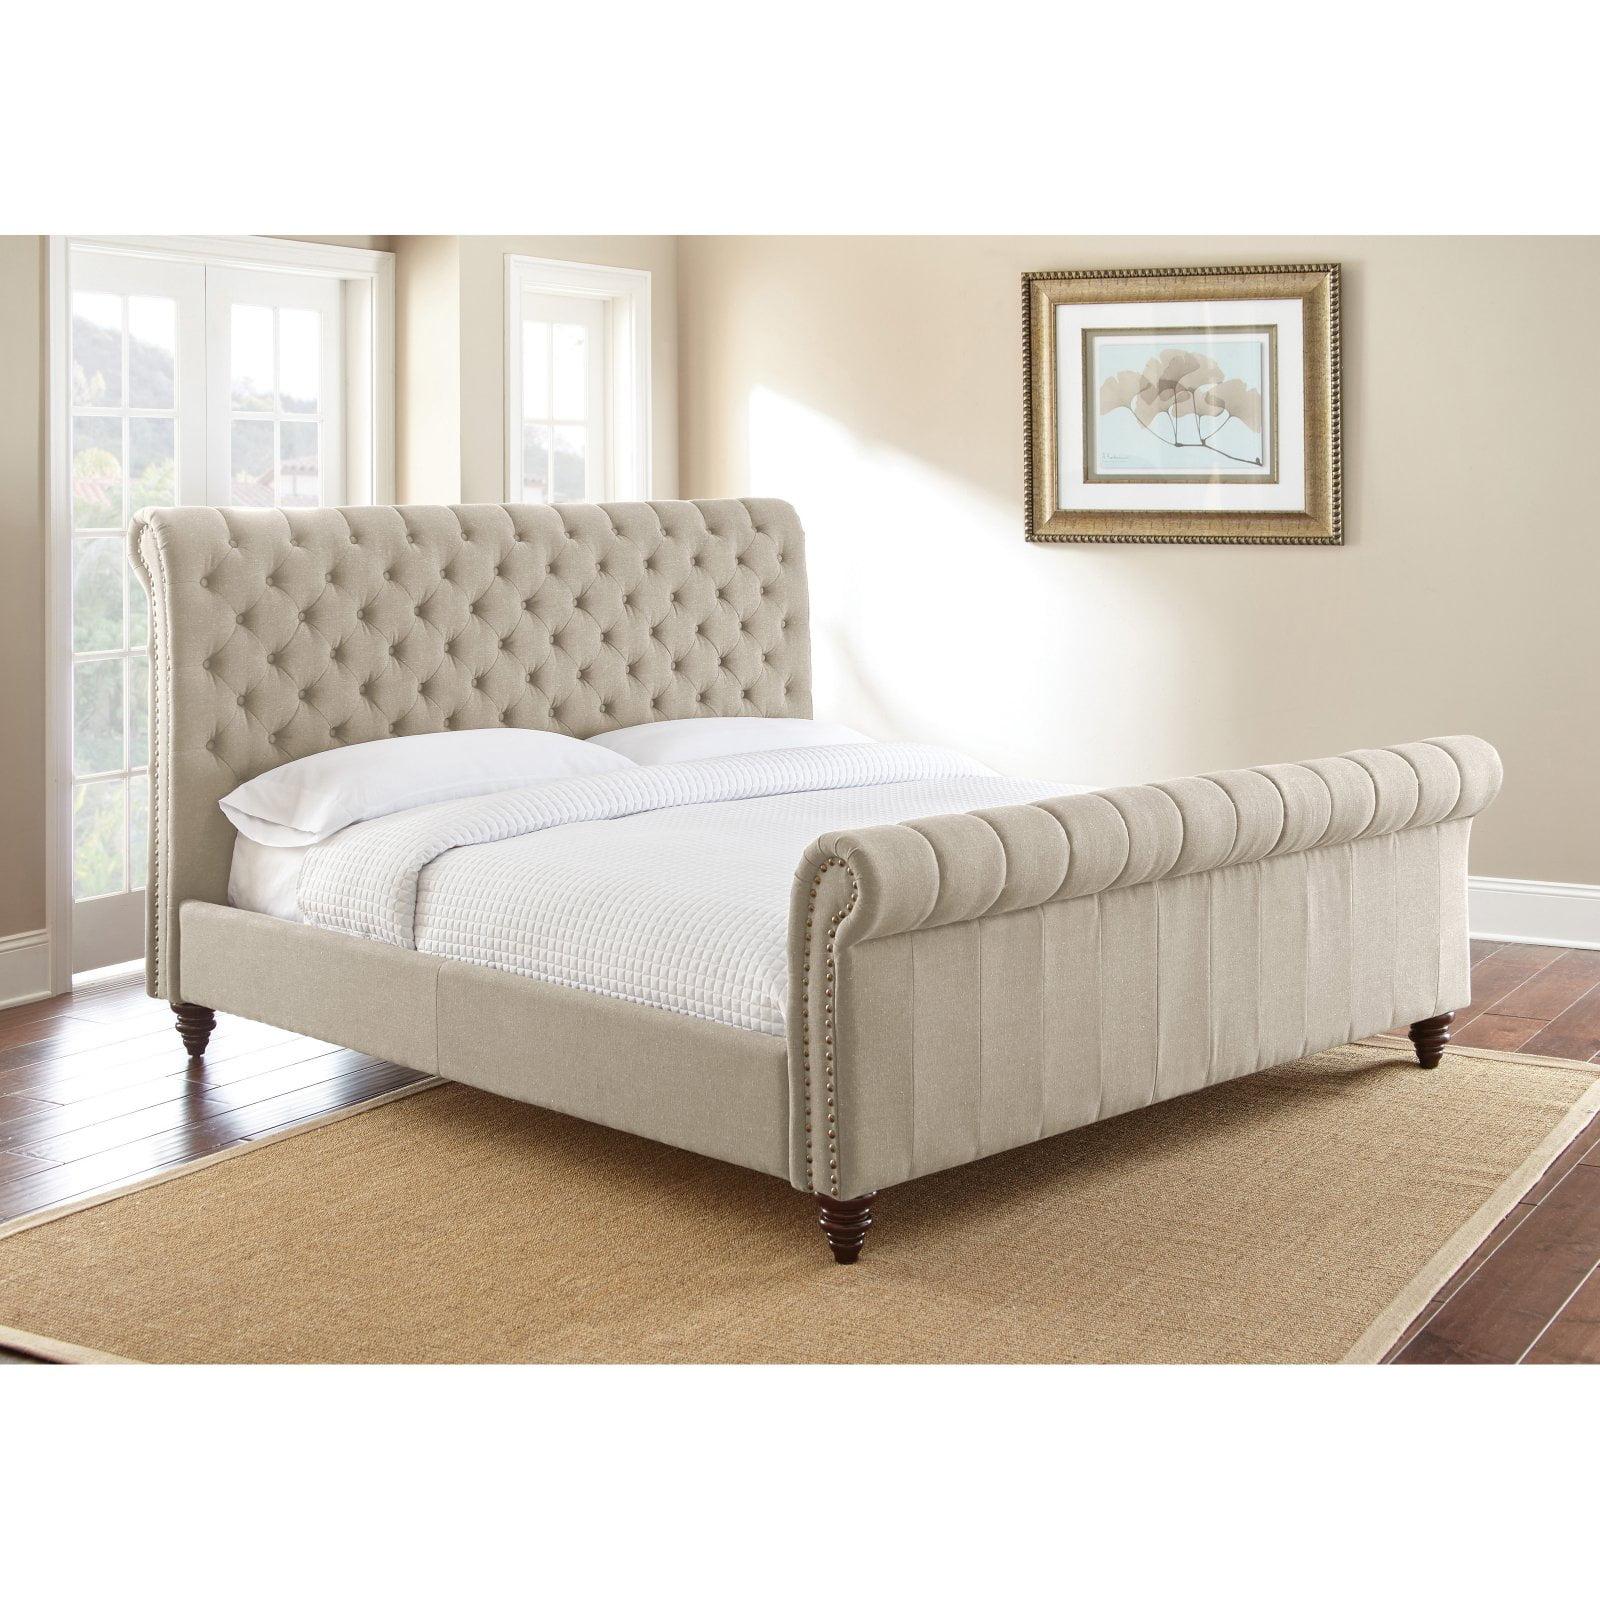 Transitional Beige Linen King Sleigh Bed with Nailhead Trim